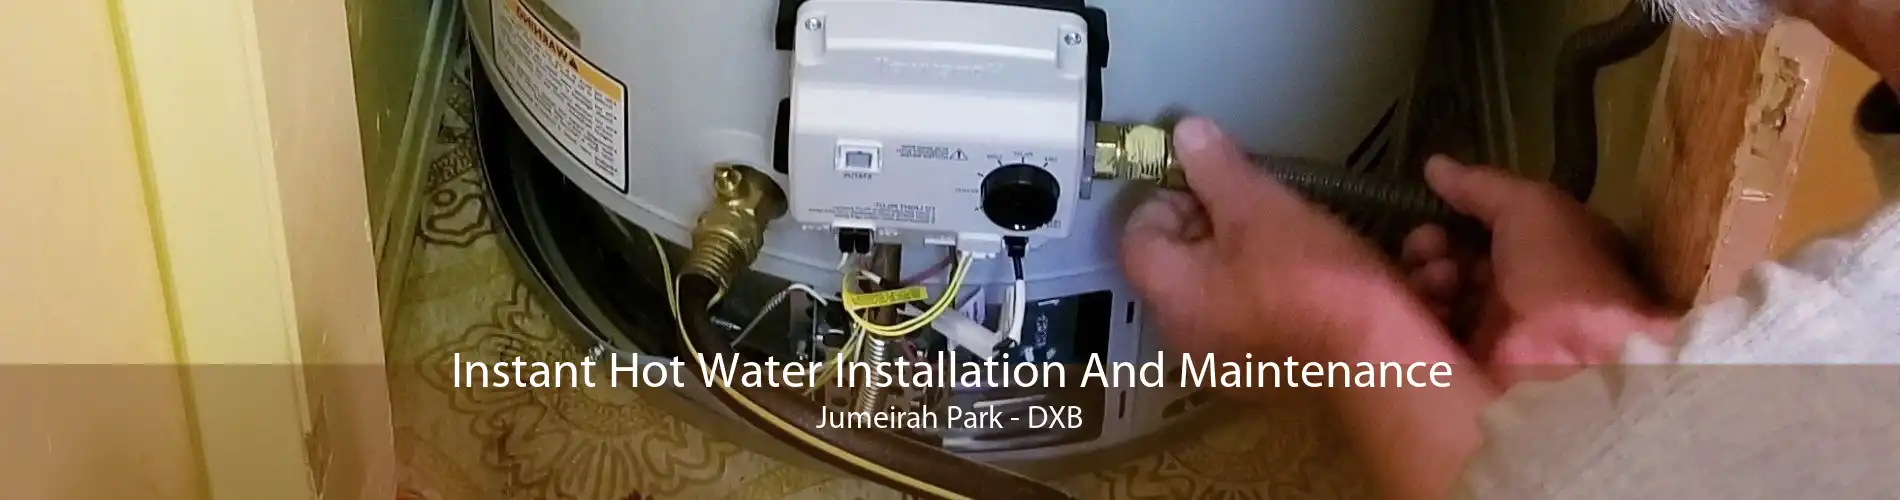 Instant Hot Water Installation And Maintenance Jumeirah Park - DXB